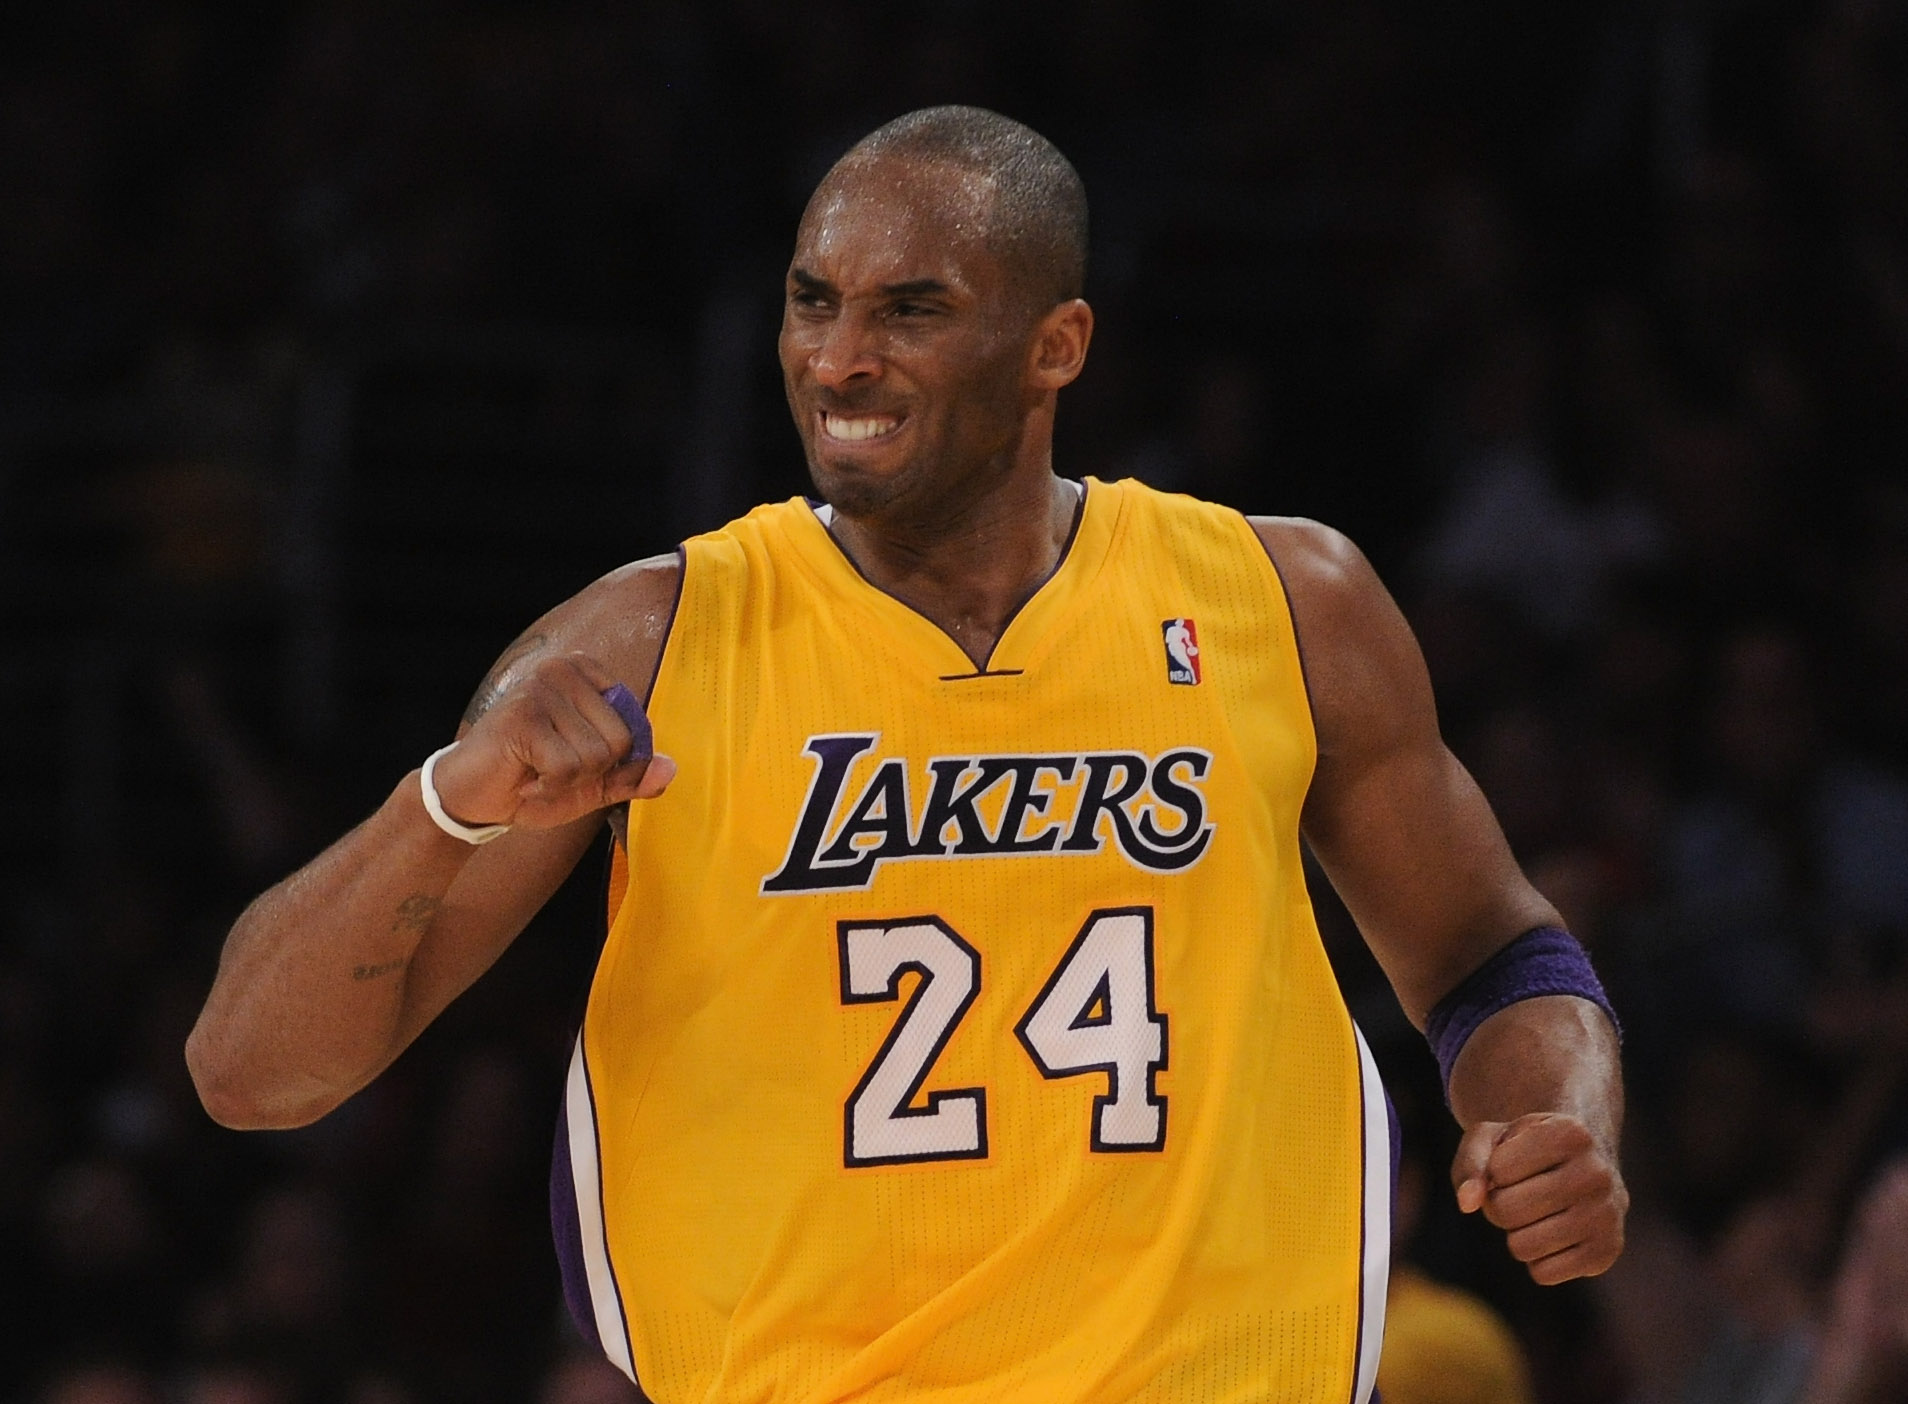 Greatest Sports Franchises - Los Angeles Lakers